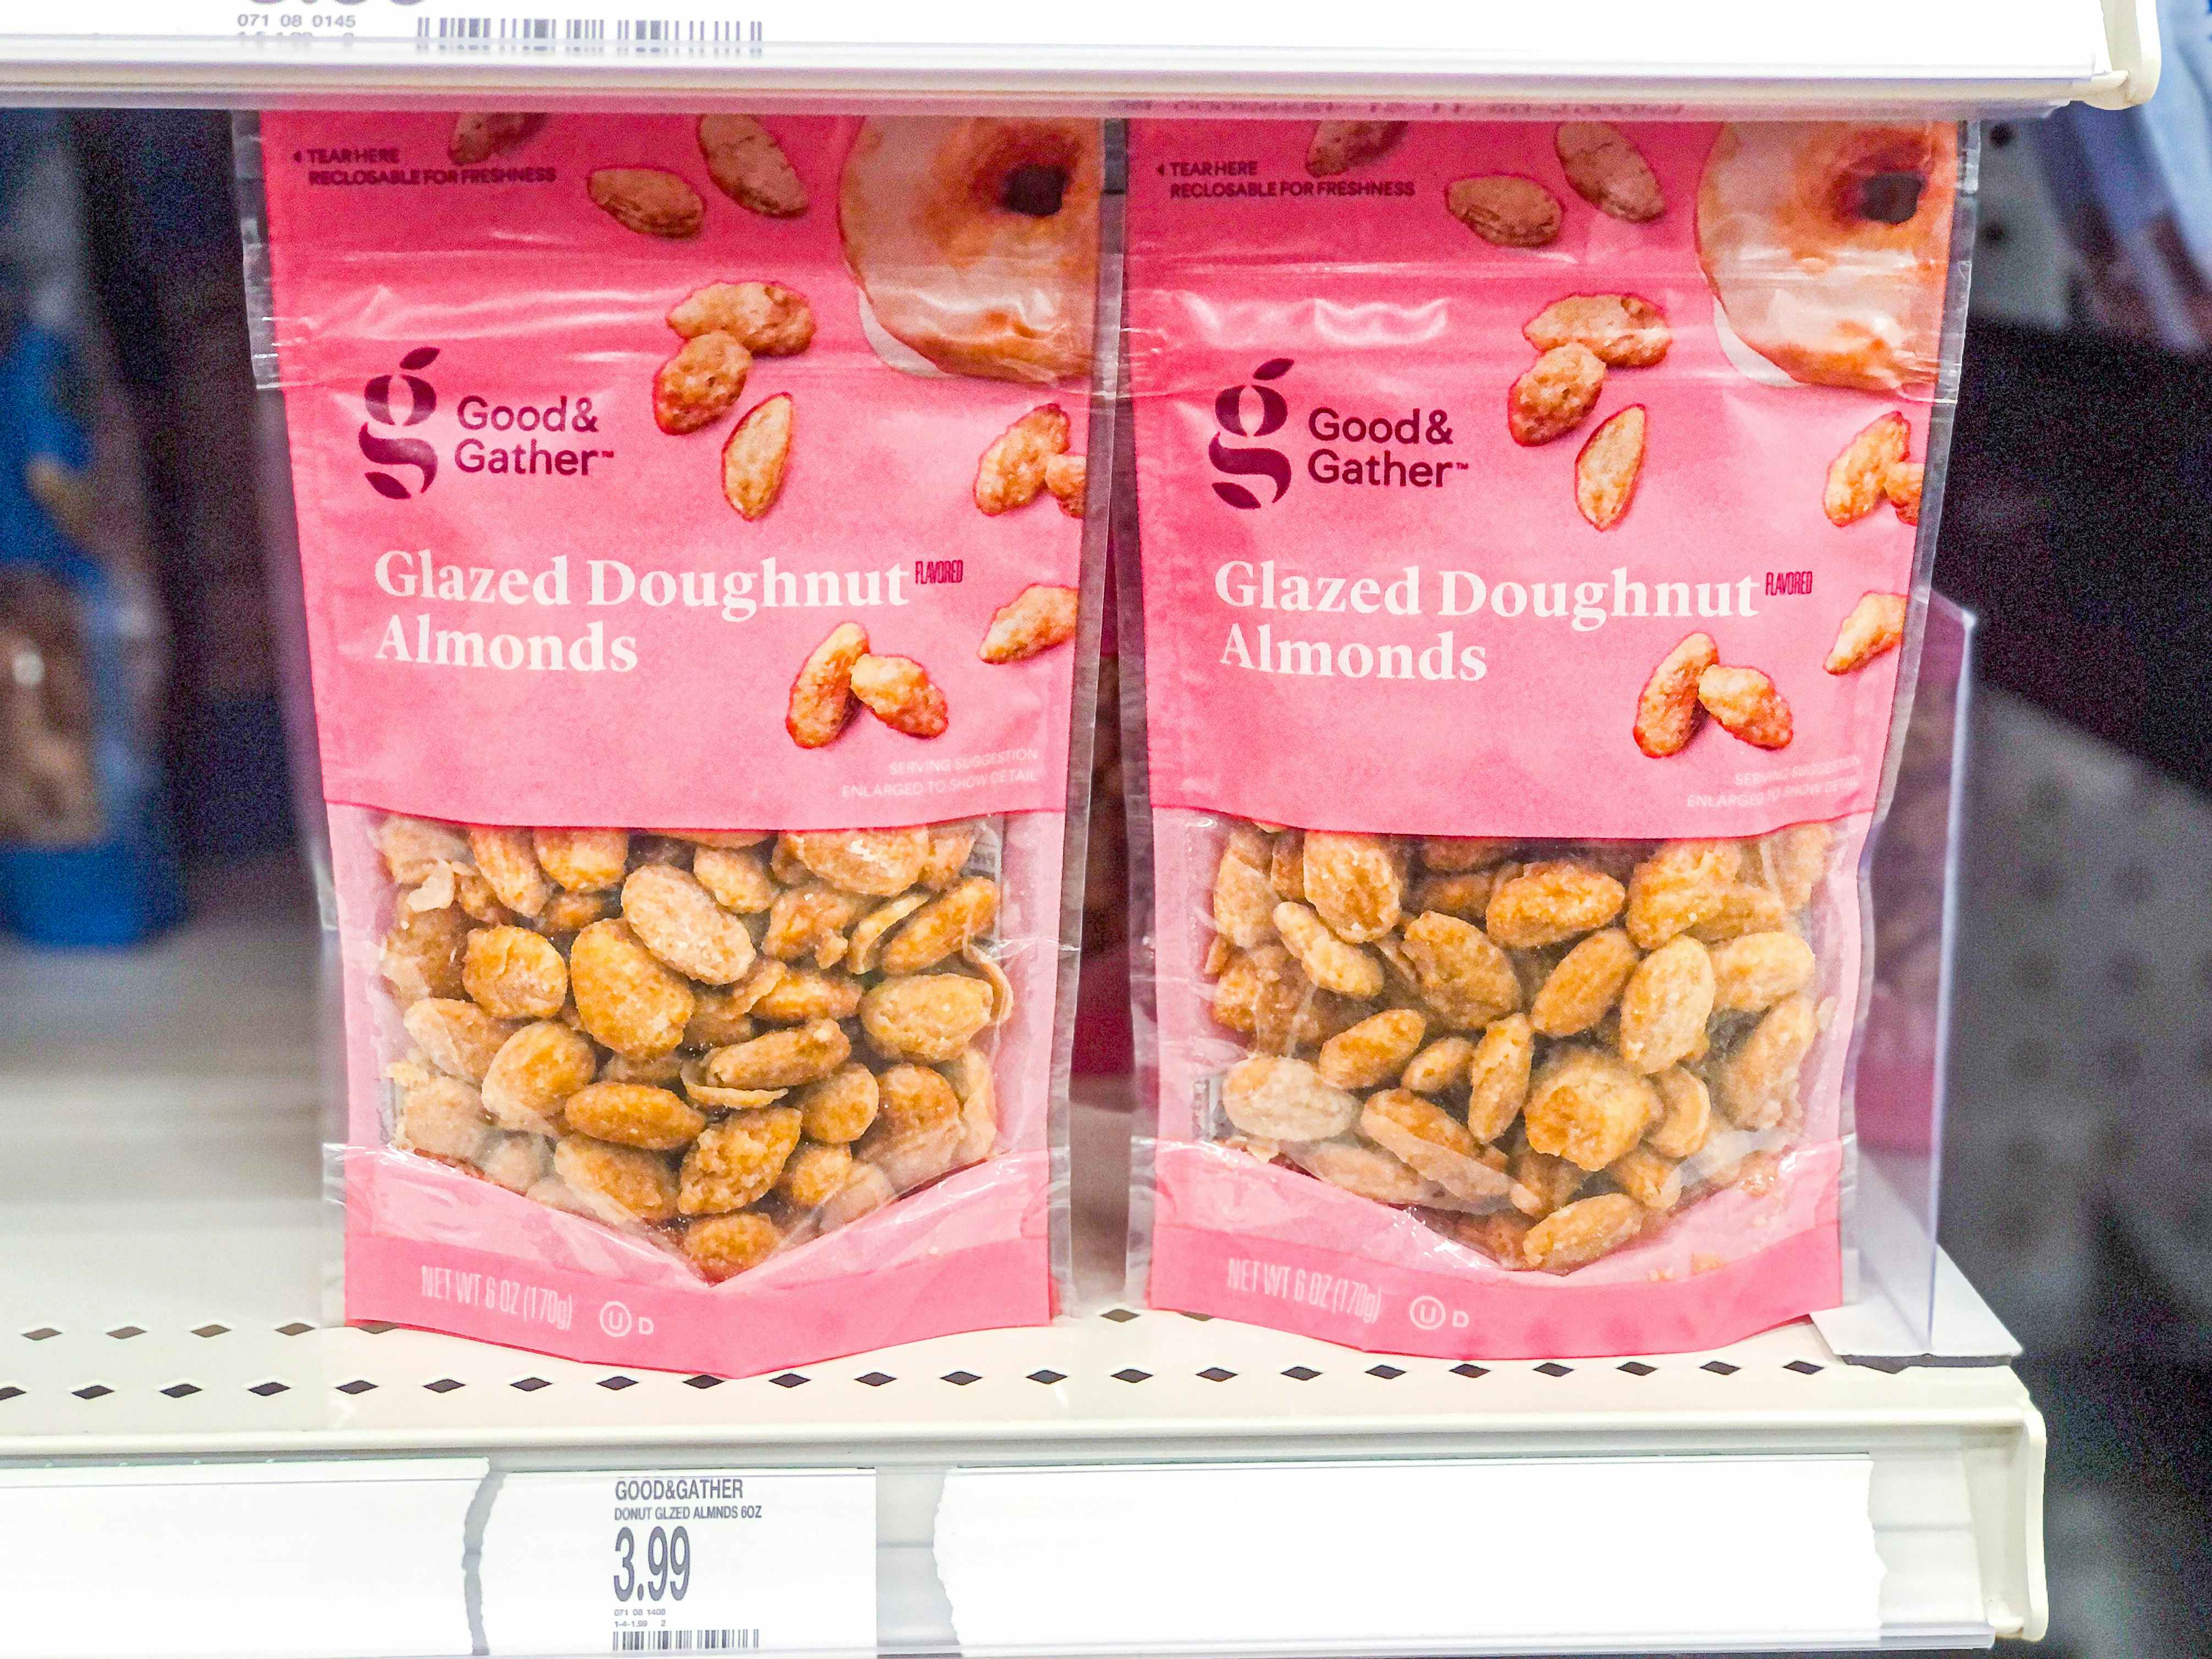 Two bags of Favorite Day Glazed Doughnut Almonds on the shelf at Target